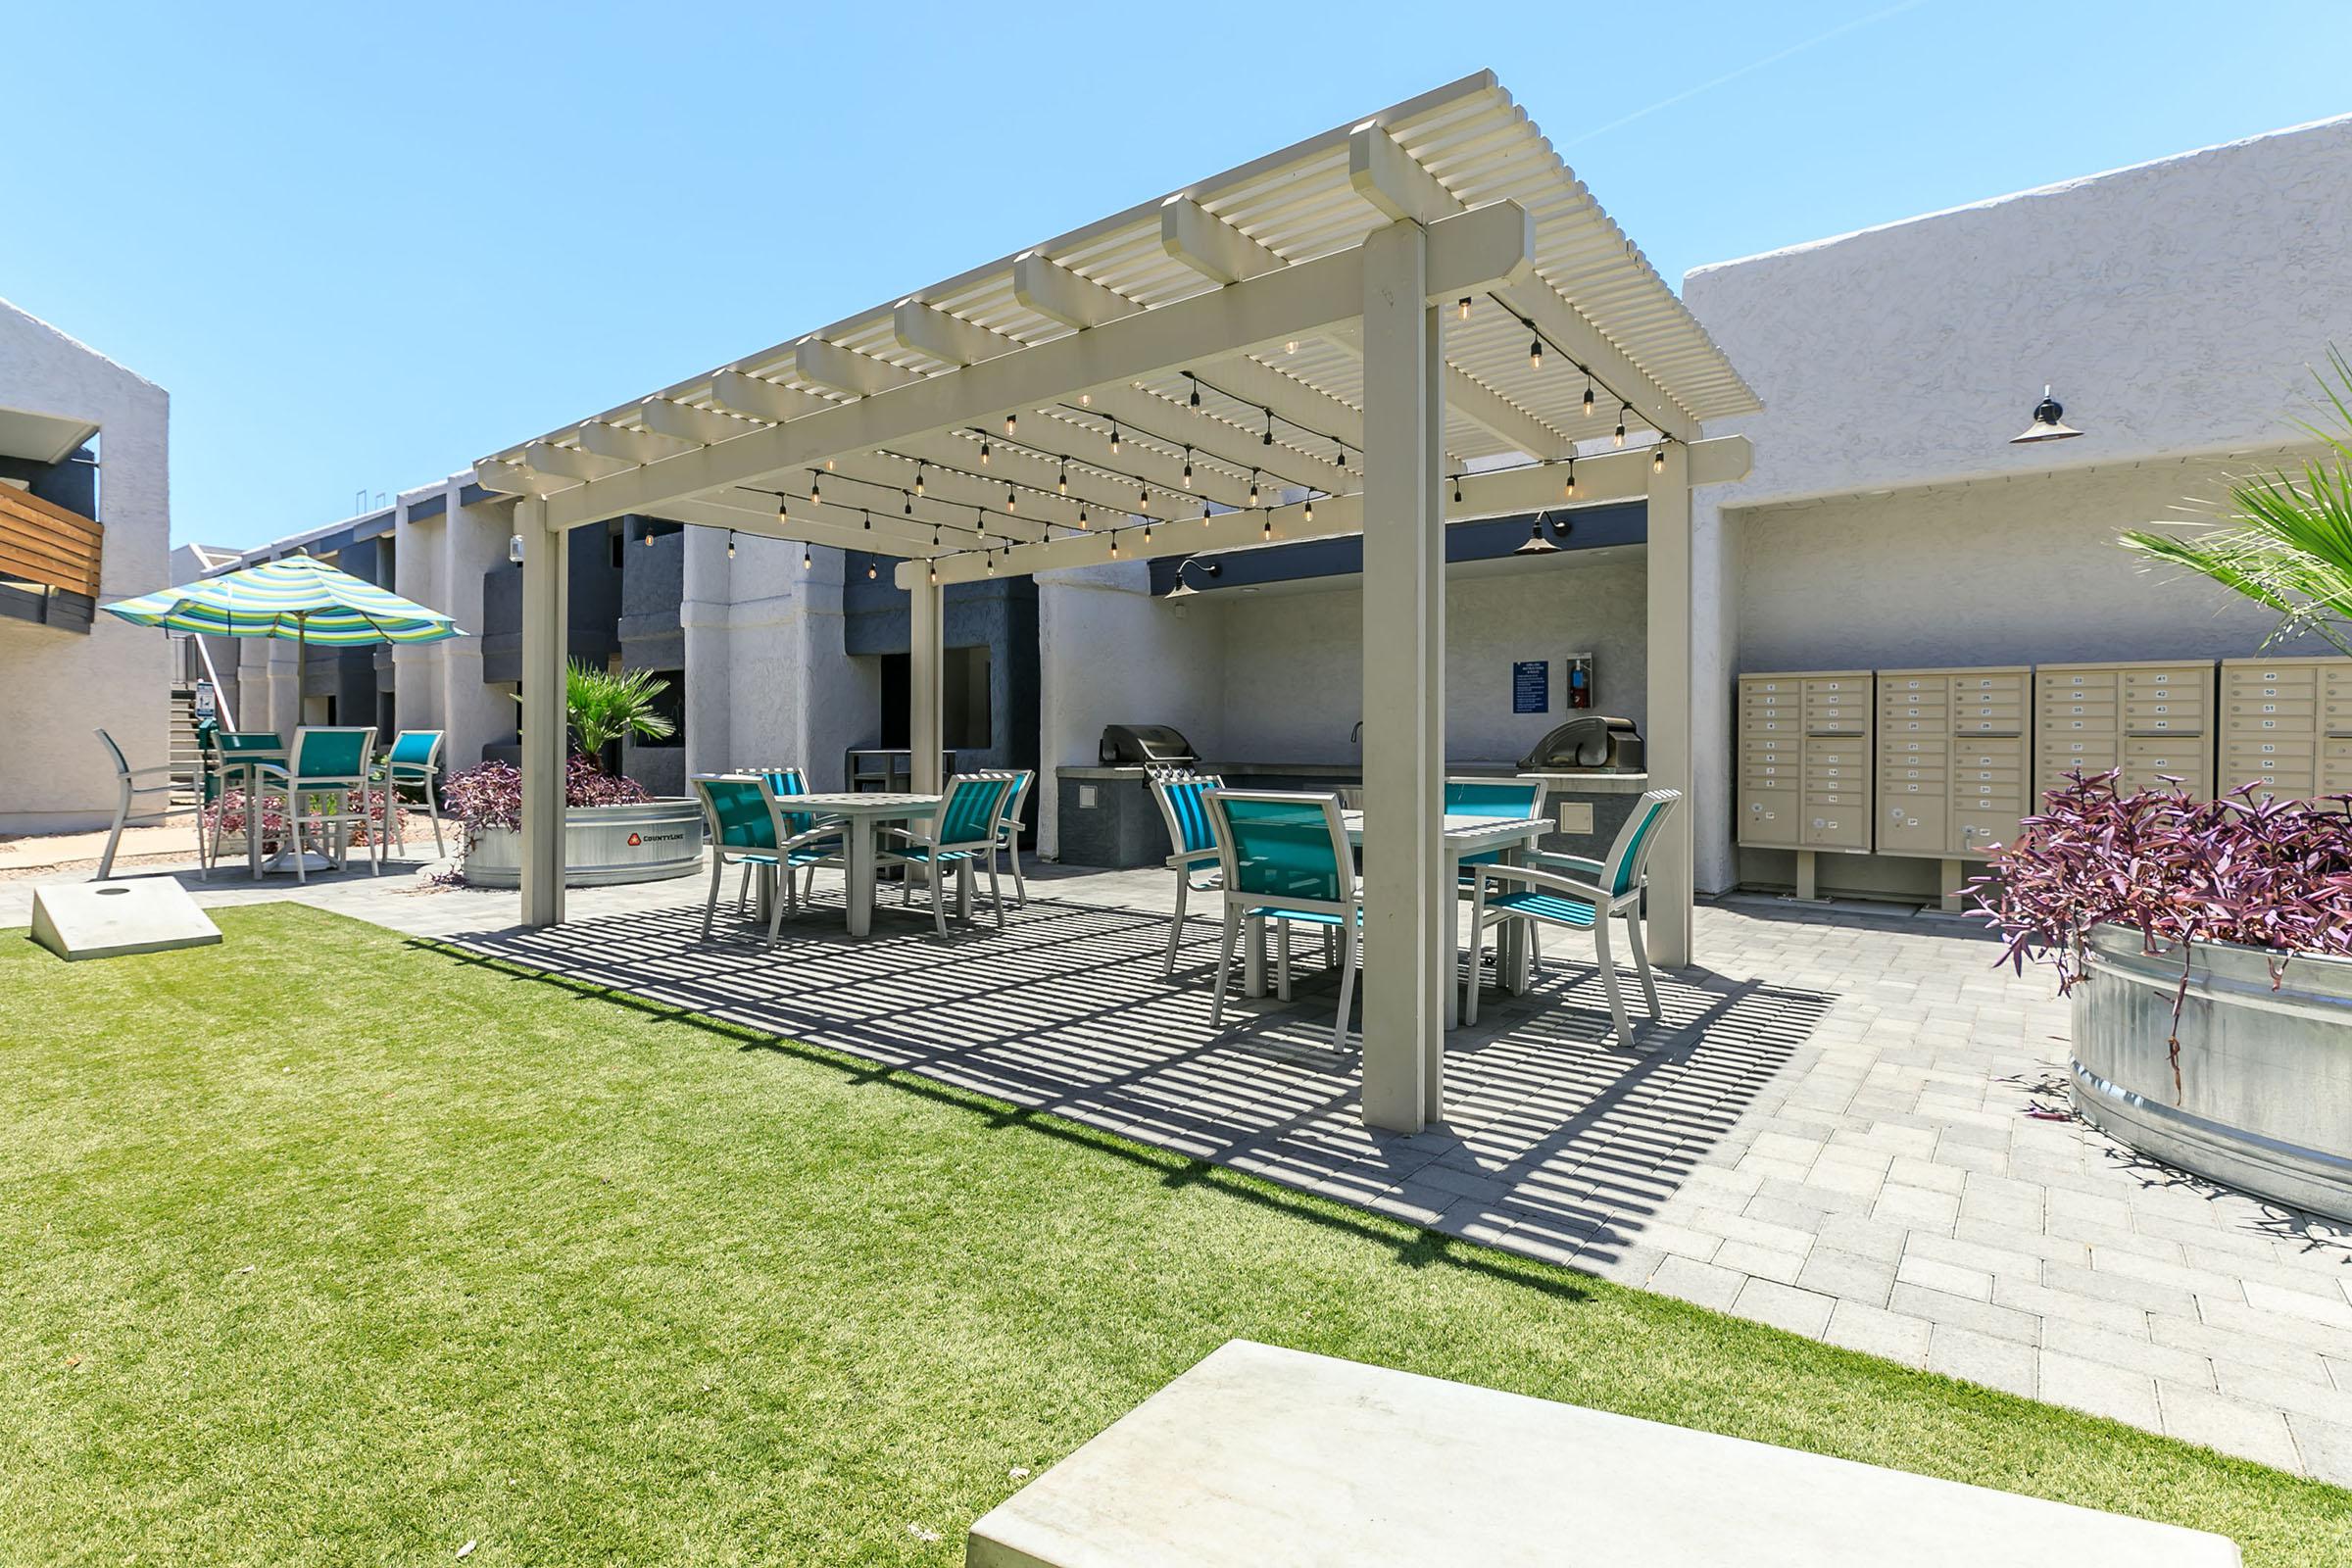 Shaded outdoor pergola with overhead bulb lights and patio tables